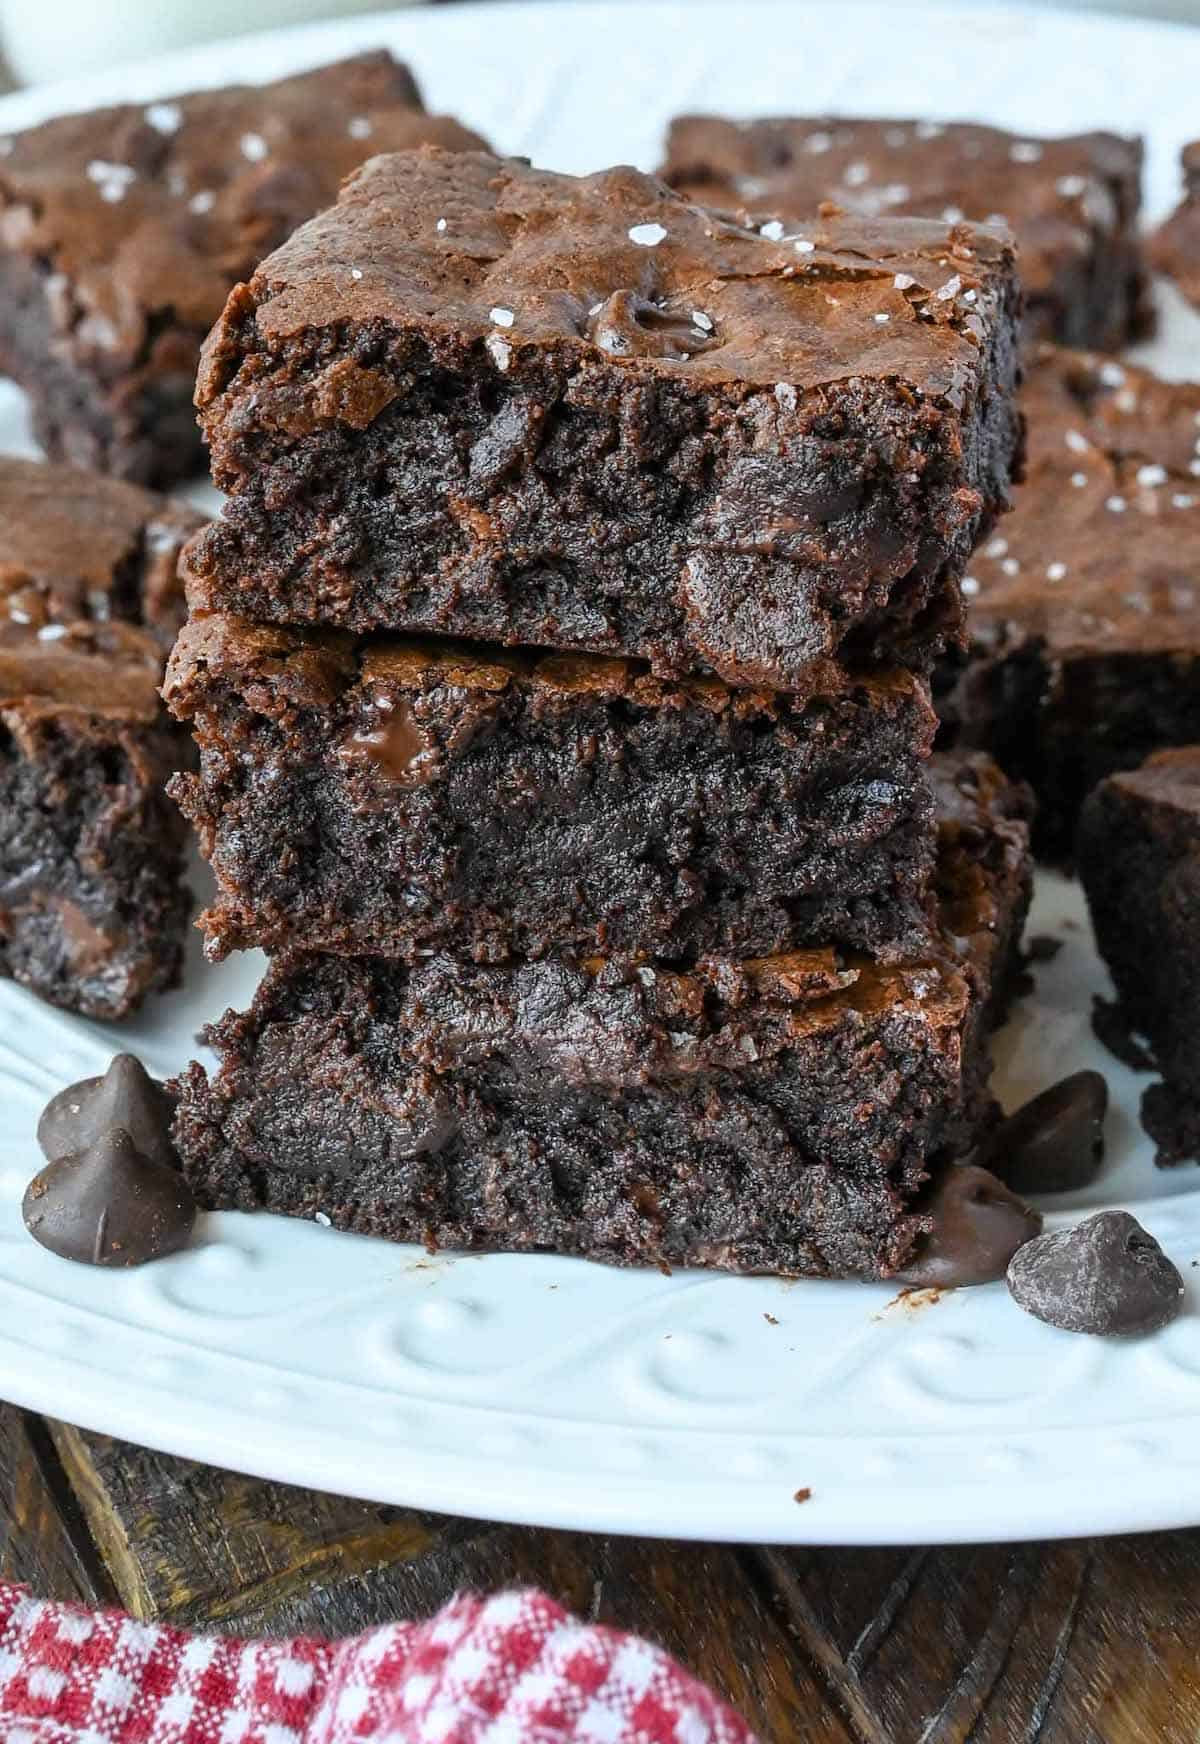 A stack of brownies on a plate.